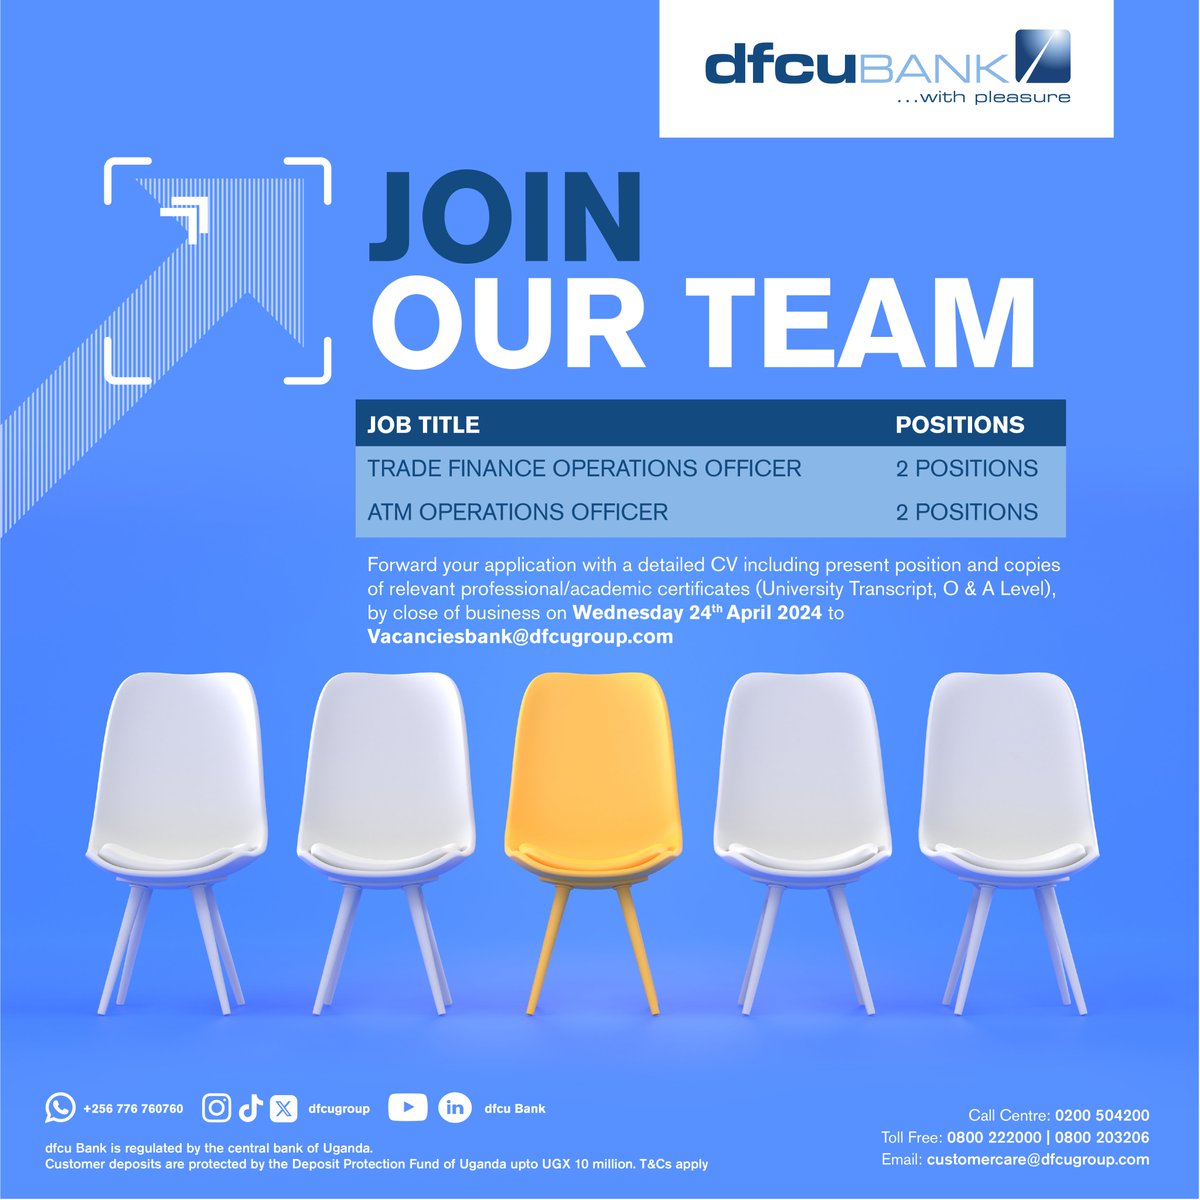 We are now hiring! Visit dfcugroup.com/careers/  for information on how to apply. #dfcuJobs